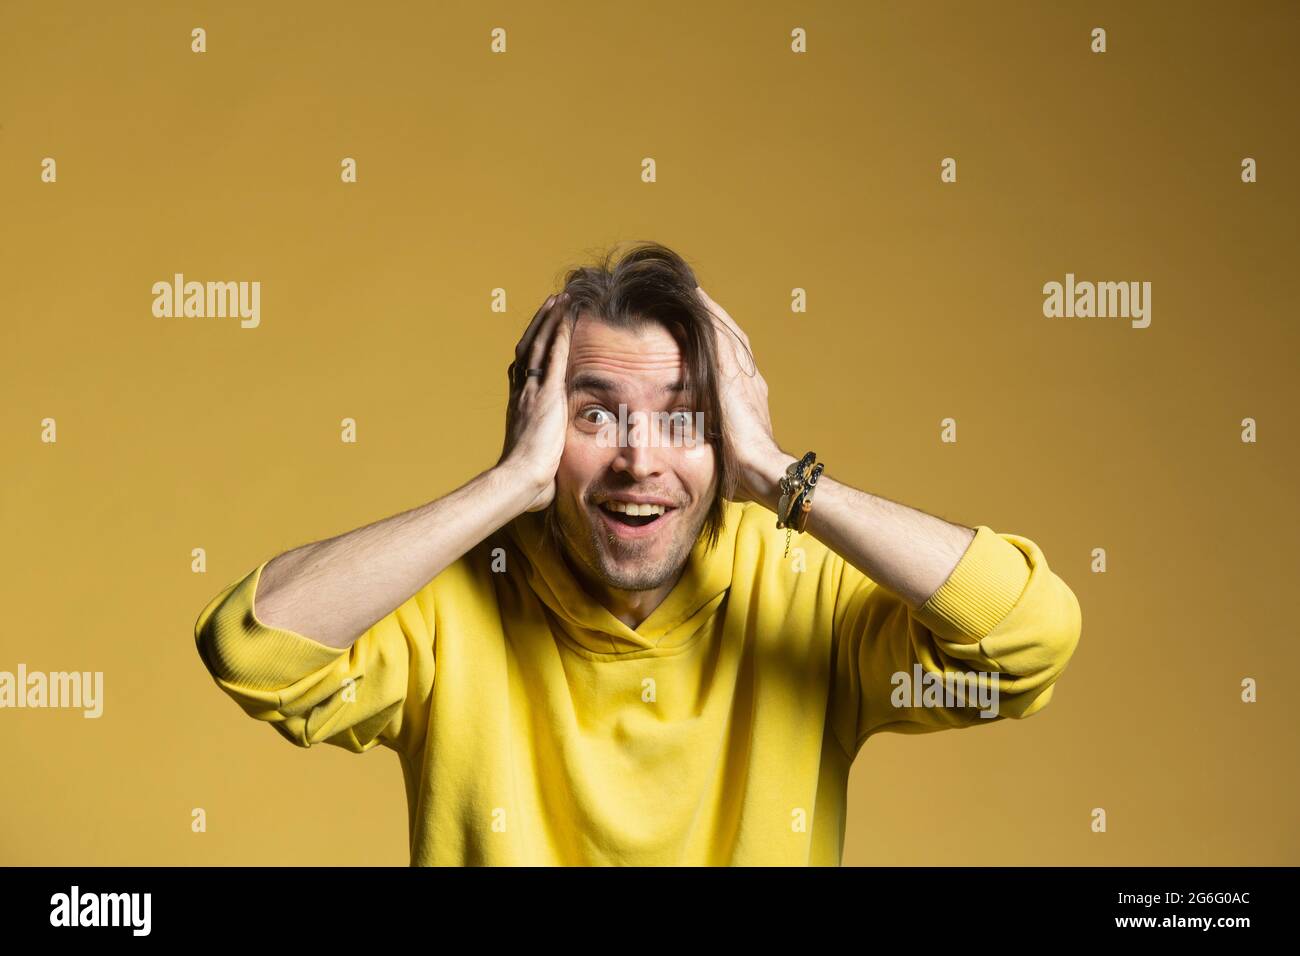 Portrait excited, surprised man on yellow background Stock Photo